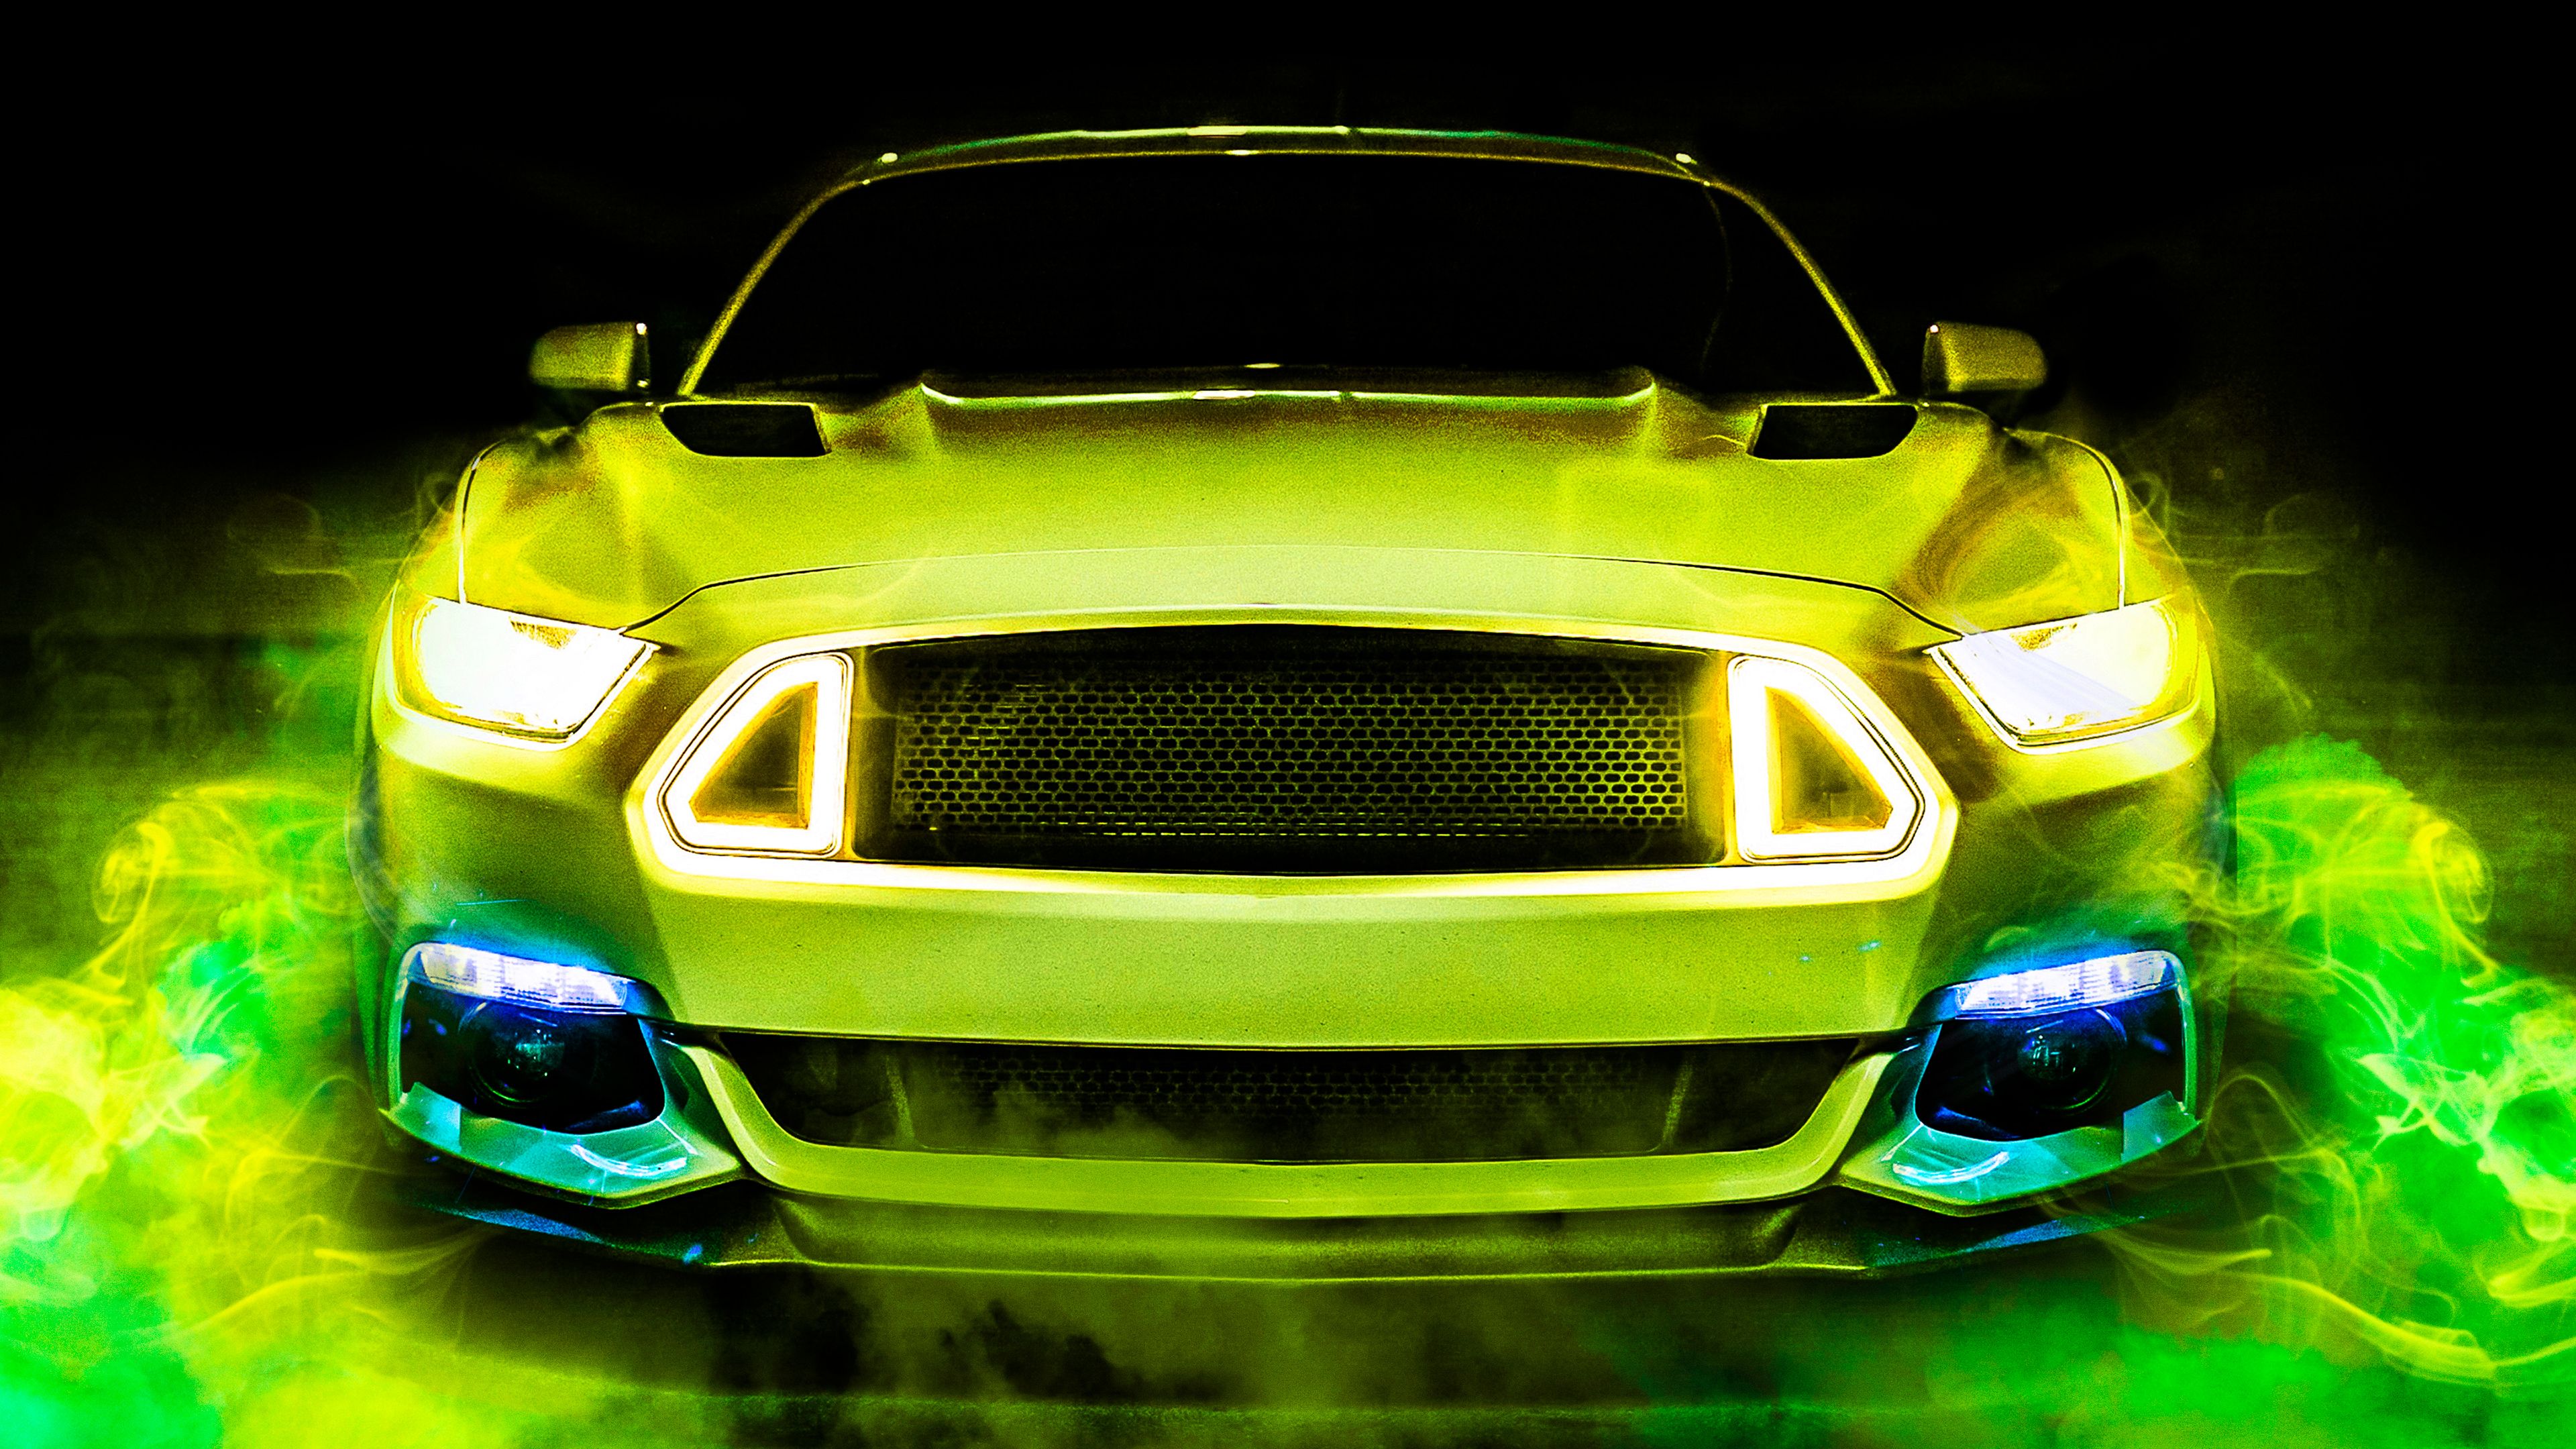  Ford Hintergrundbild 3840x2160. Green Ford Mustang 4k, HD Cars, 4k Wallpaper, Image, Background, Photo and Picture